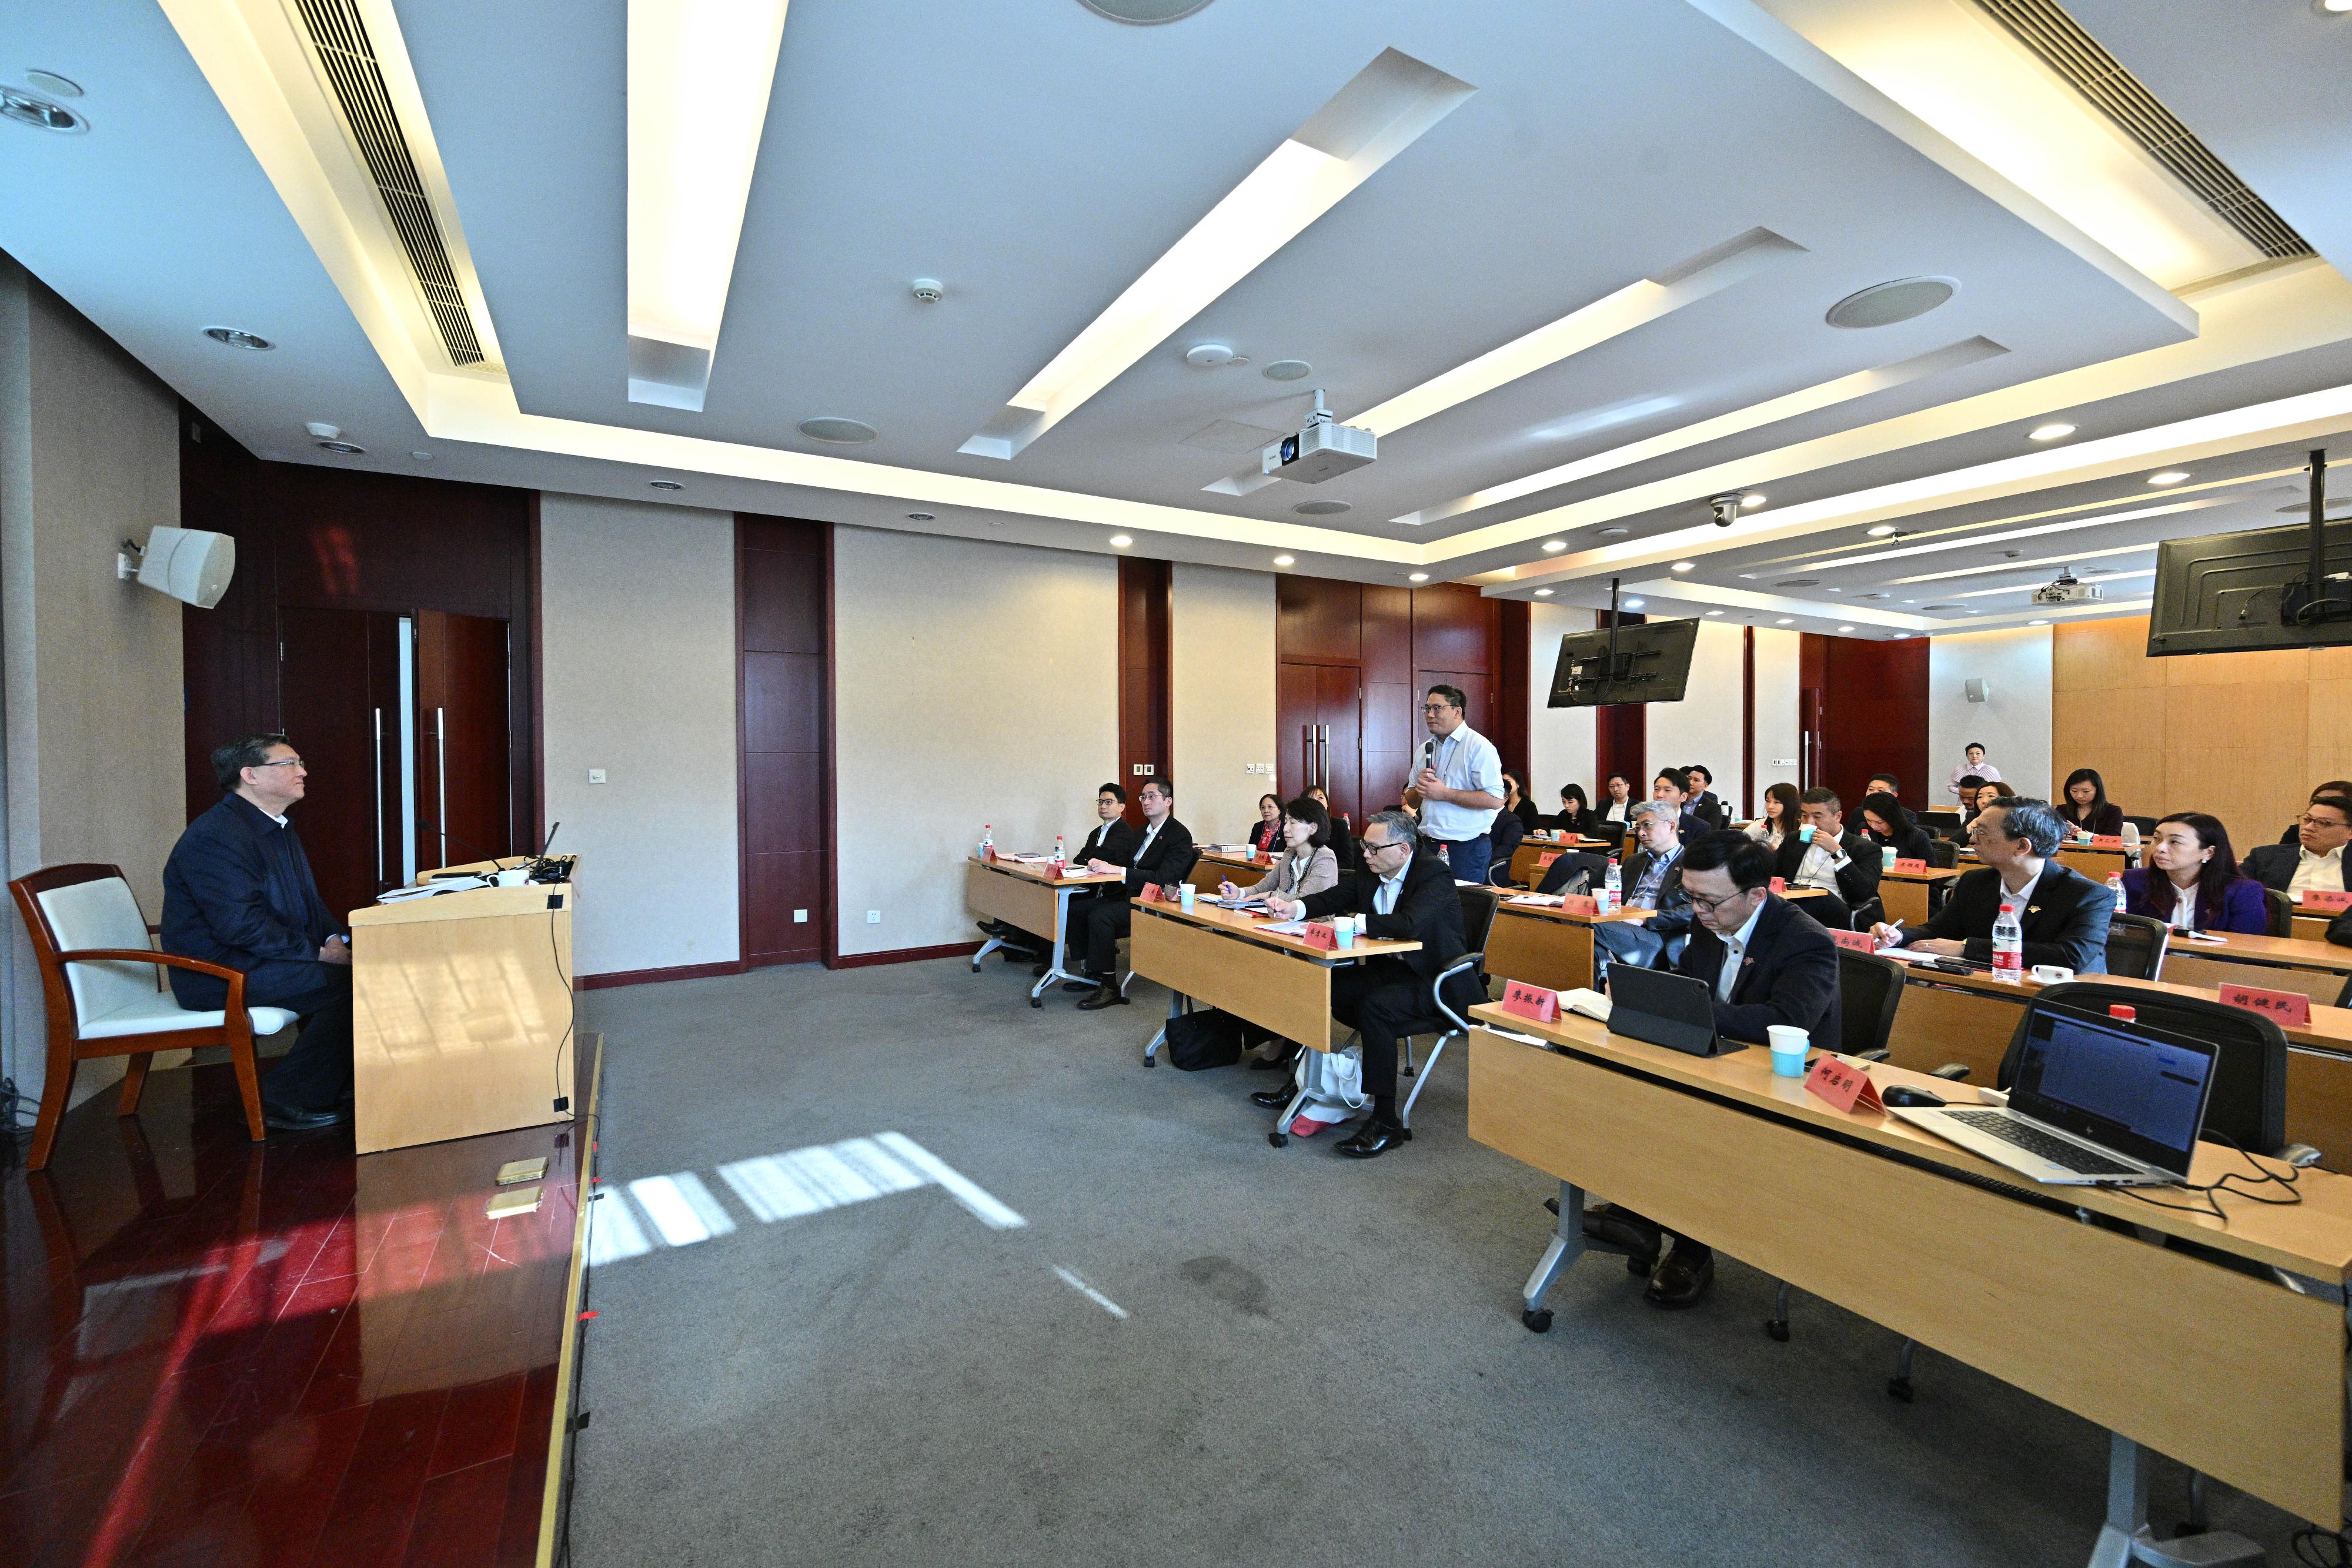 The delegation of politically appointed officials continued their national studies programme at the National Academy of Governance (NAG) this morning (November 21). Photo shows Professor Zhang Zhanbin of the School of Marxism of the NAG delivering a lecture on the philosophy and implementation of the modernisation with Chinese characteristics.